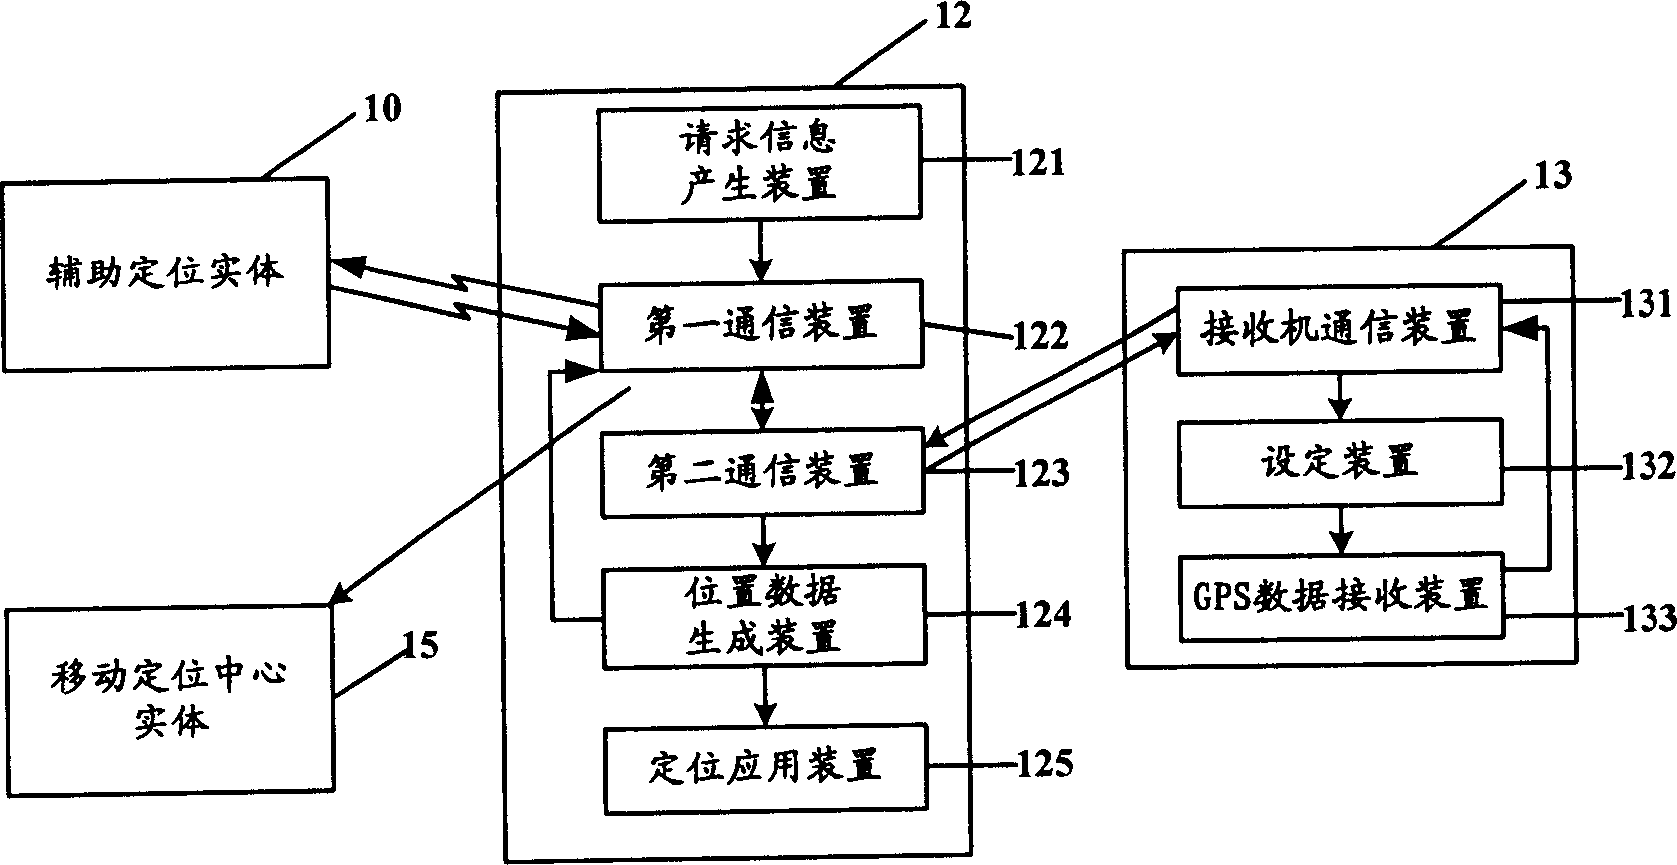 Mobile equipment having AGPS positioning function and auxiliary global positioning method